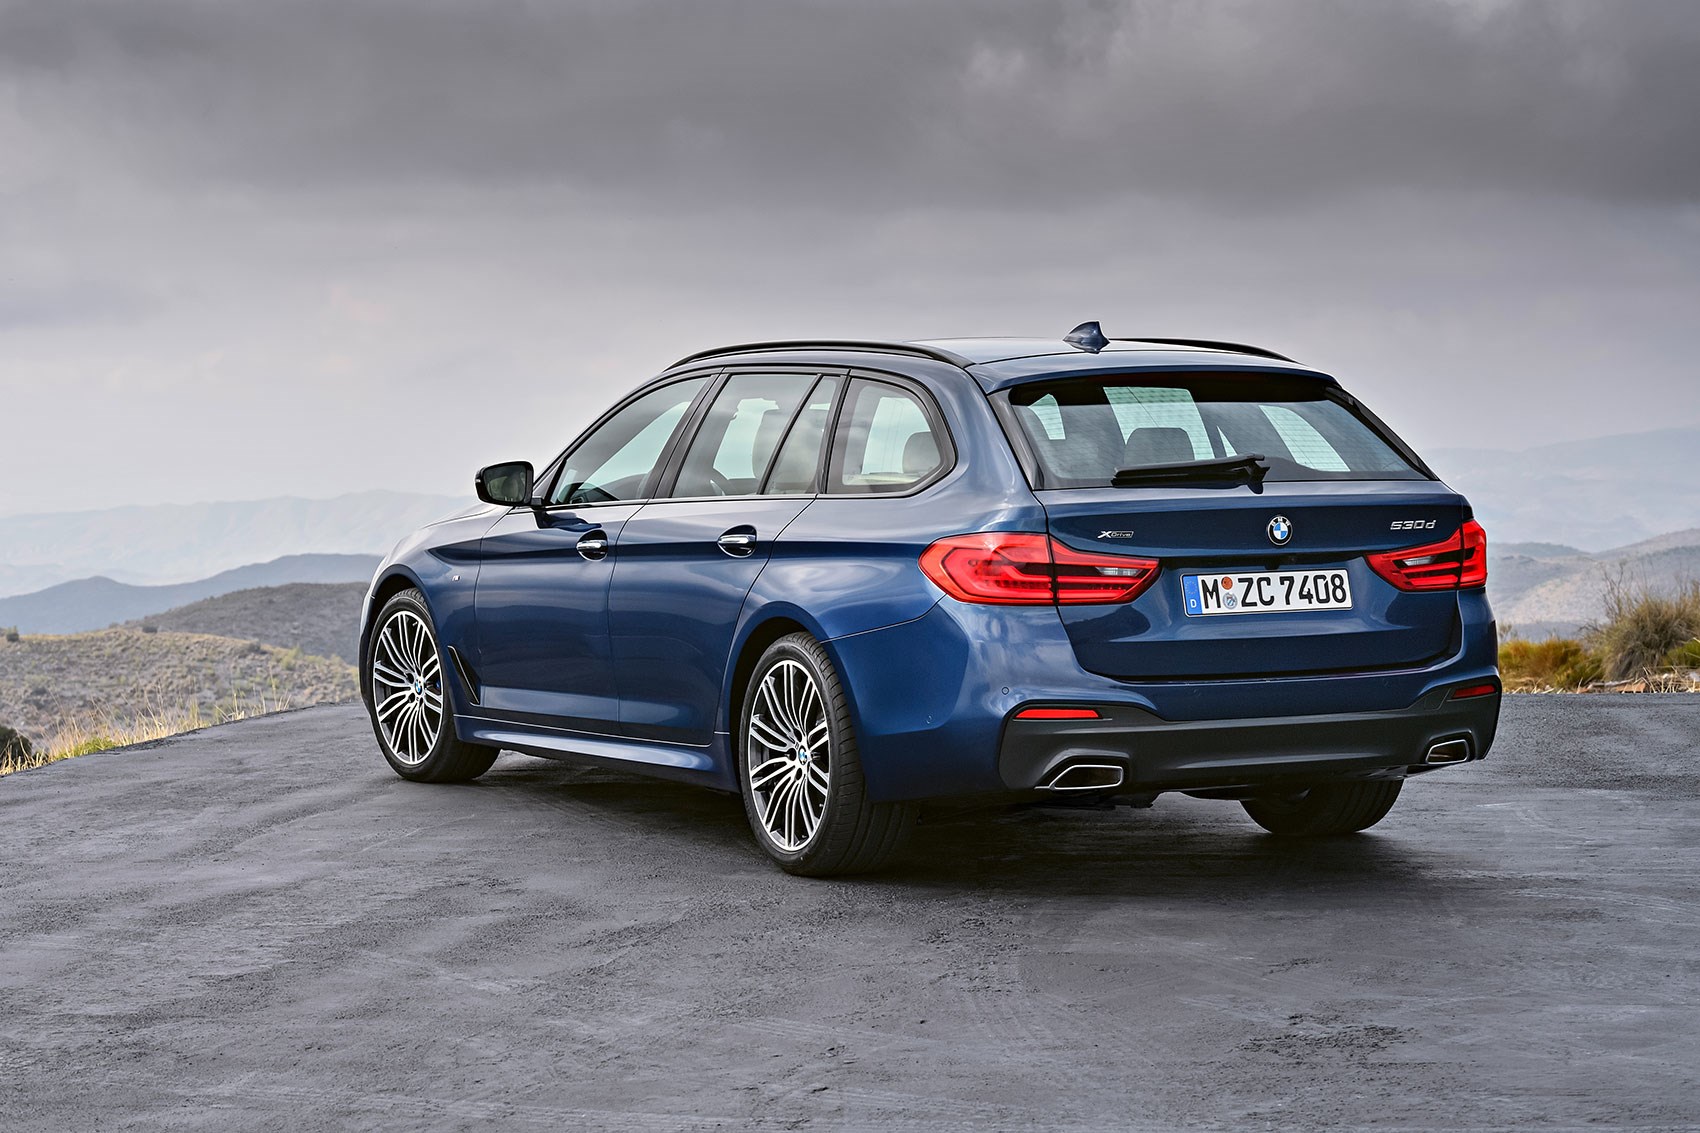 2017 BMW 5 Series Touring G31 revealed! 